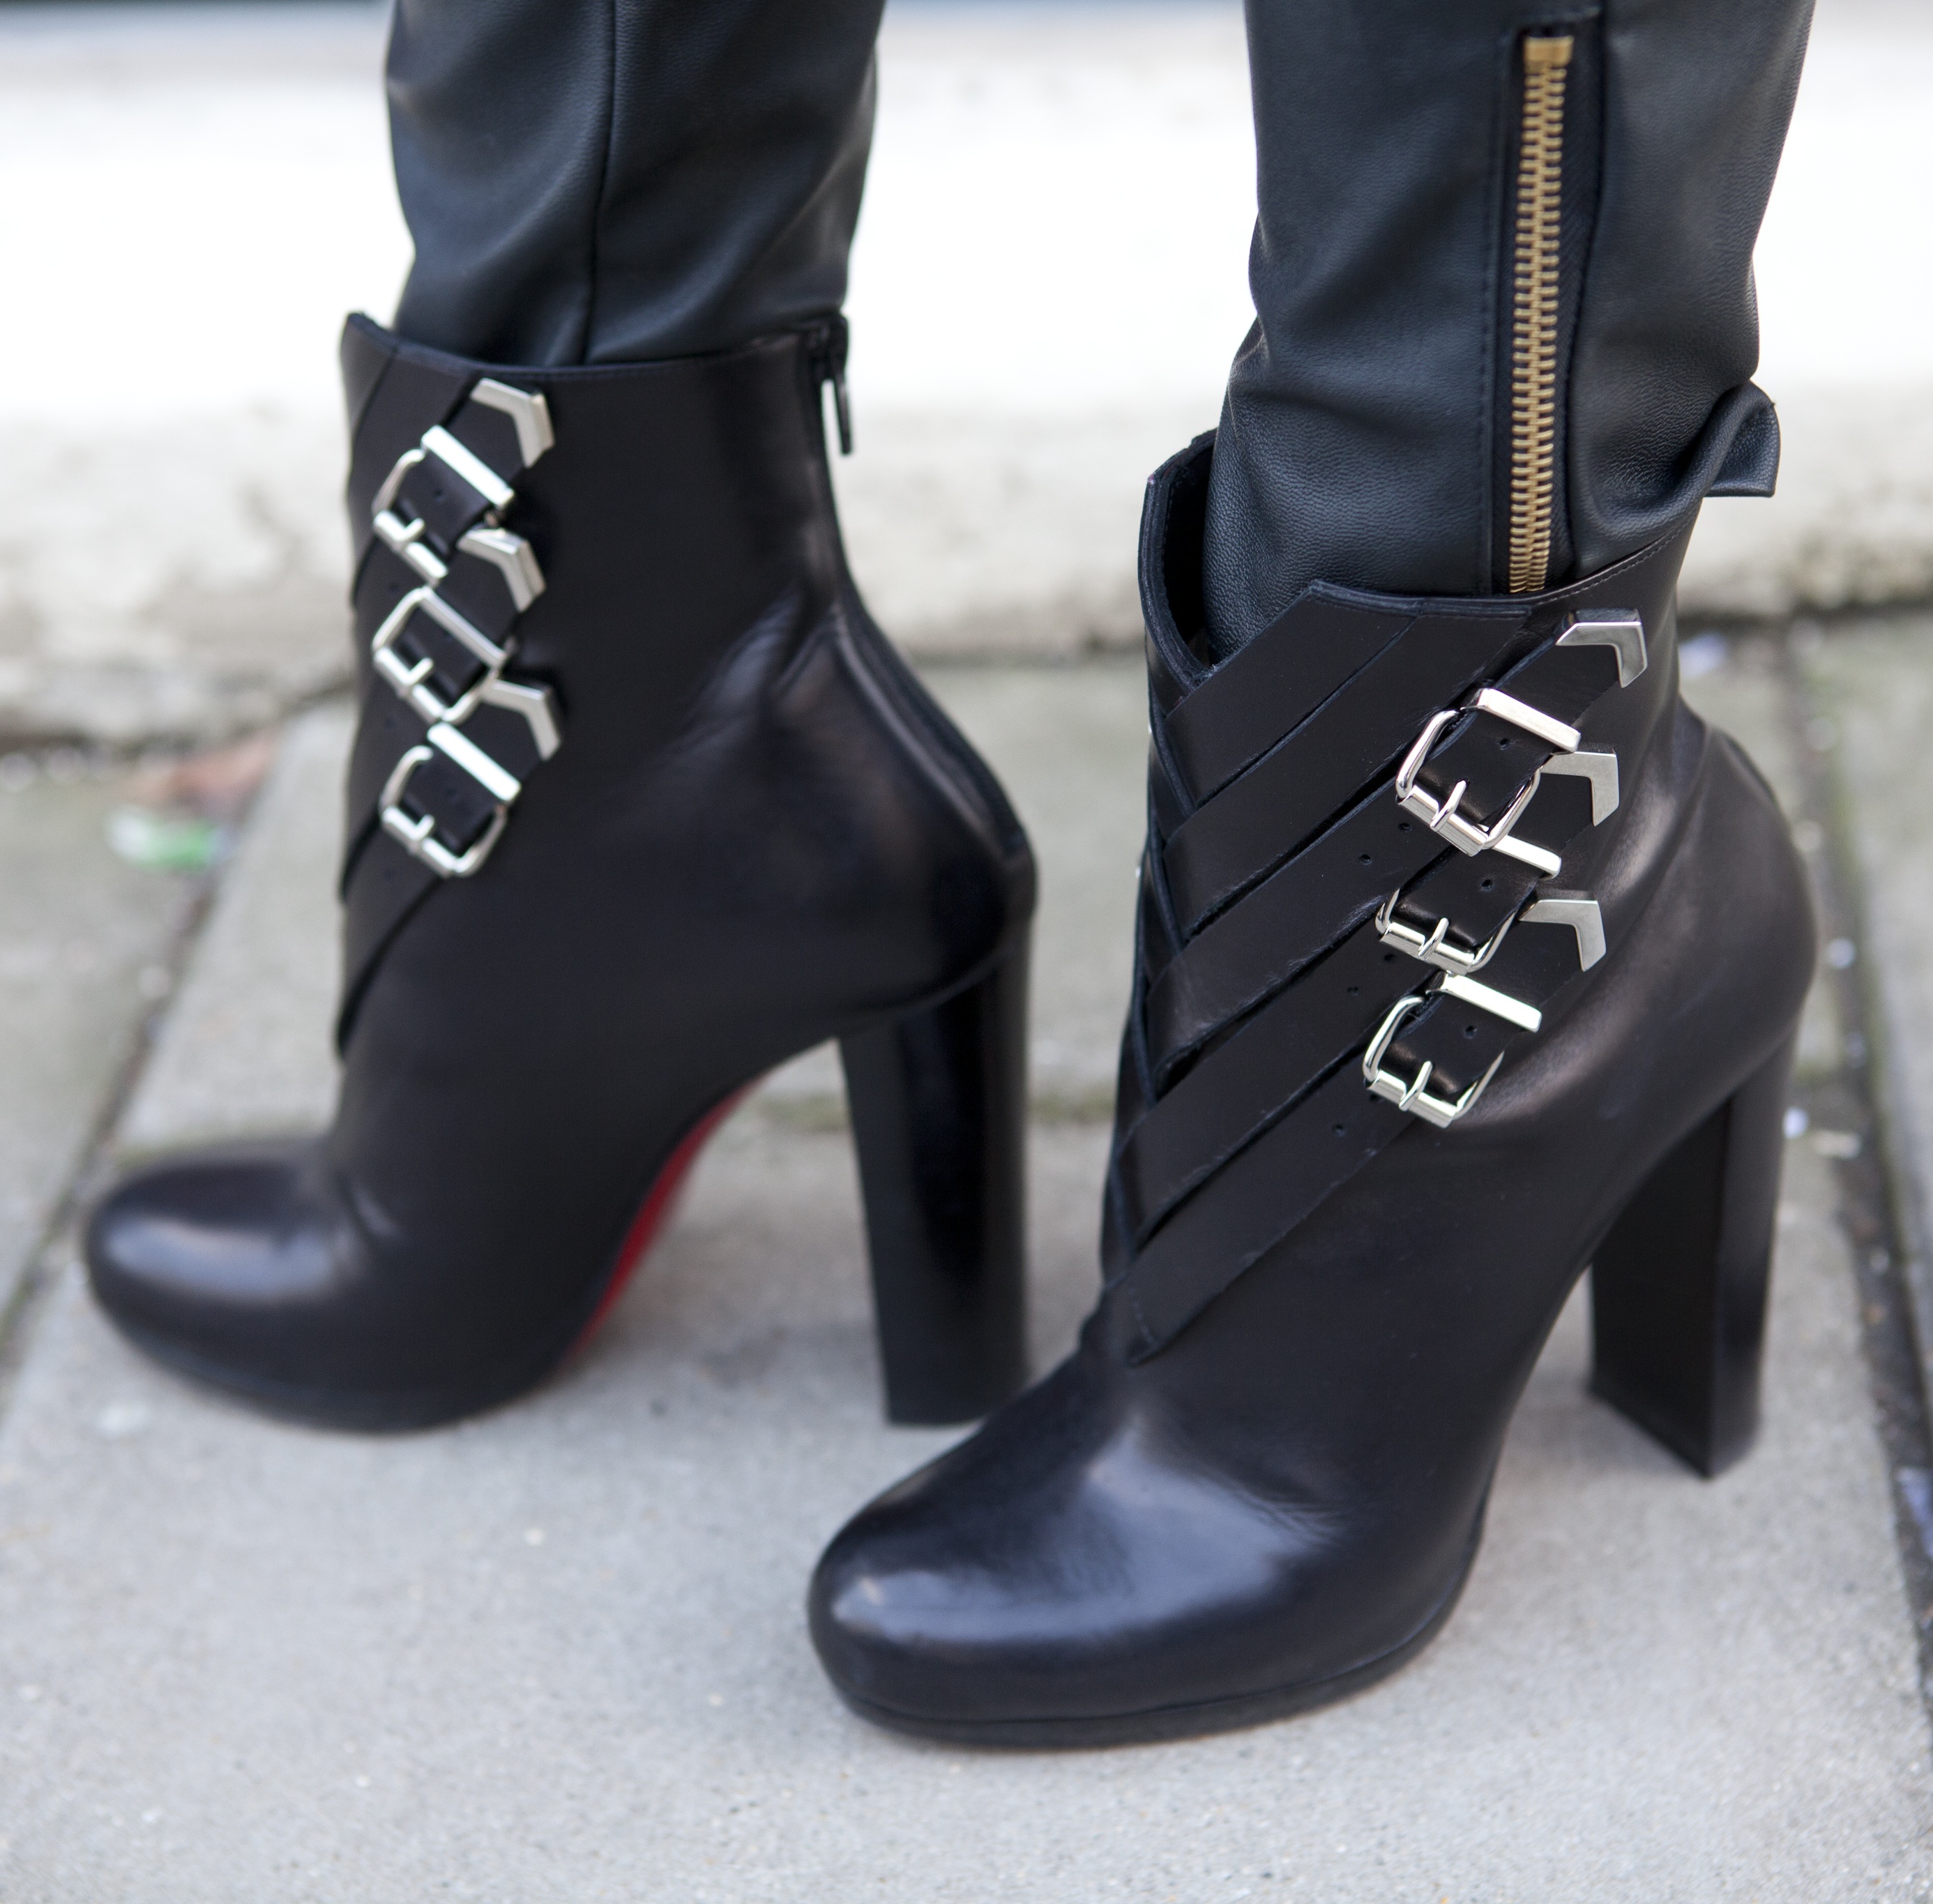 Buckle detailing on these Christian Louboutin ankle boots lent a ...  